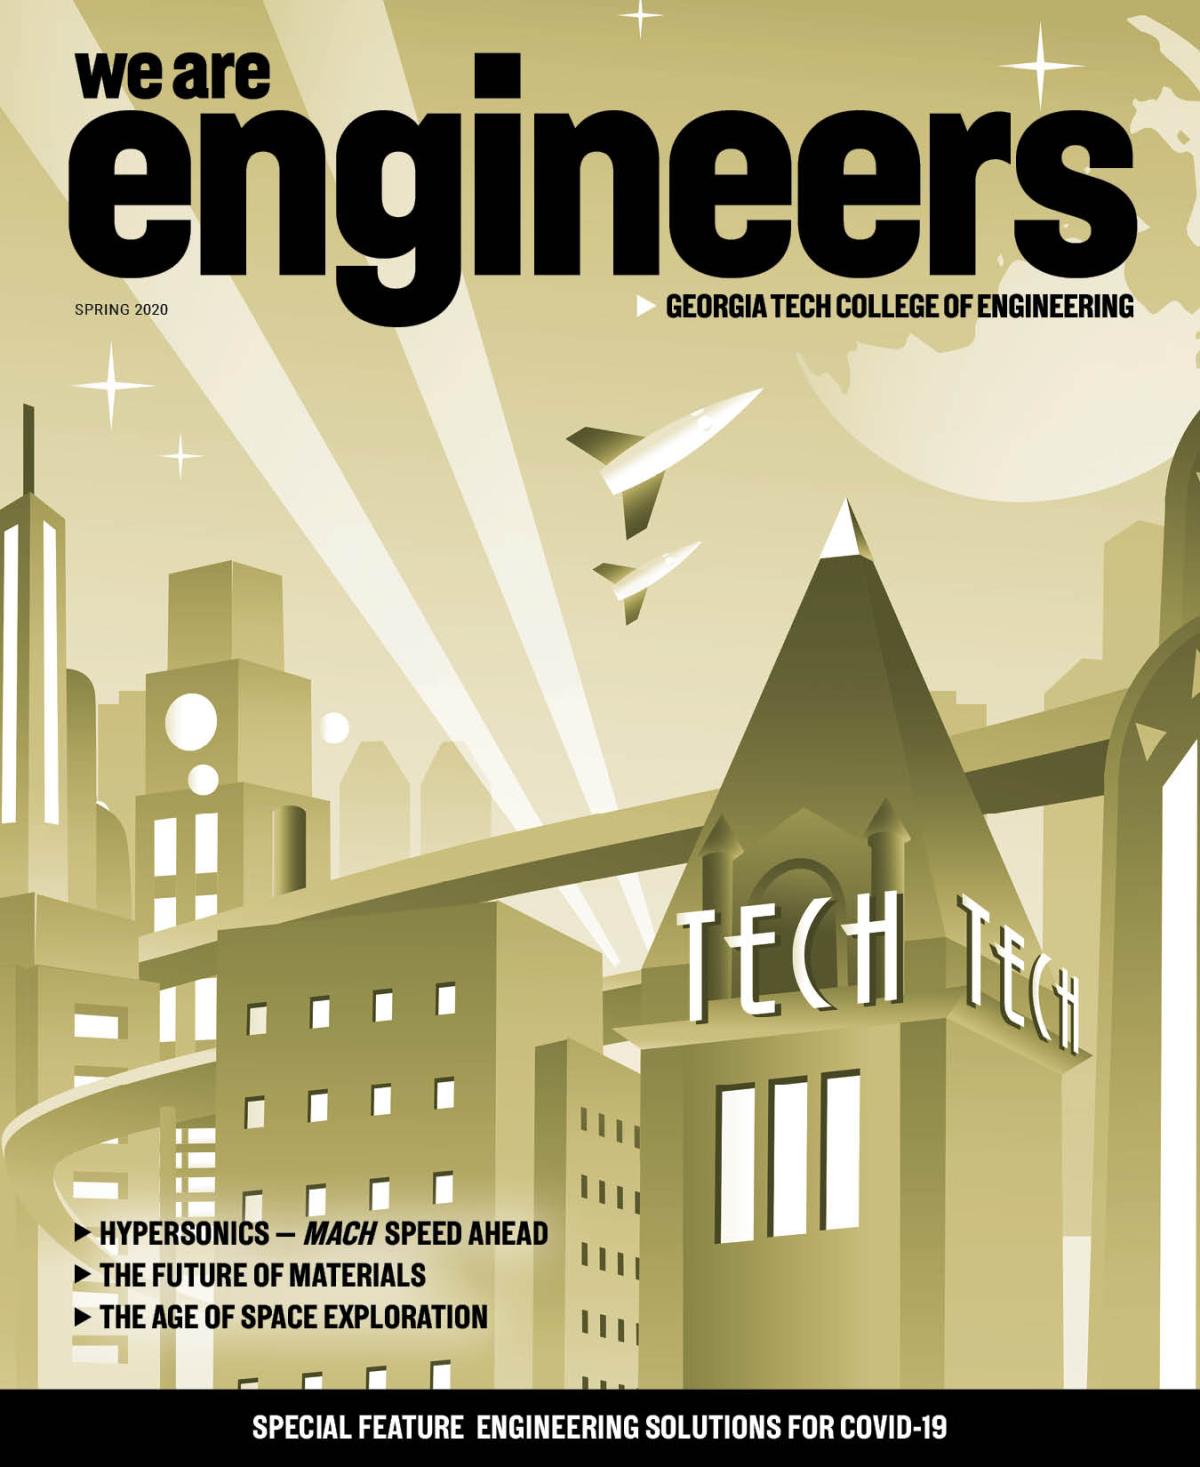 "We are Engineers" magazine cover with an illustrated image of a futuristic Tech Tower and city